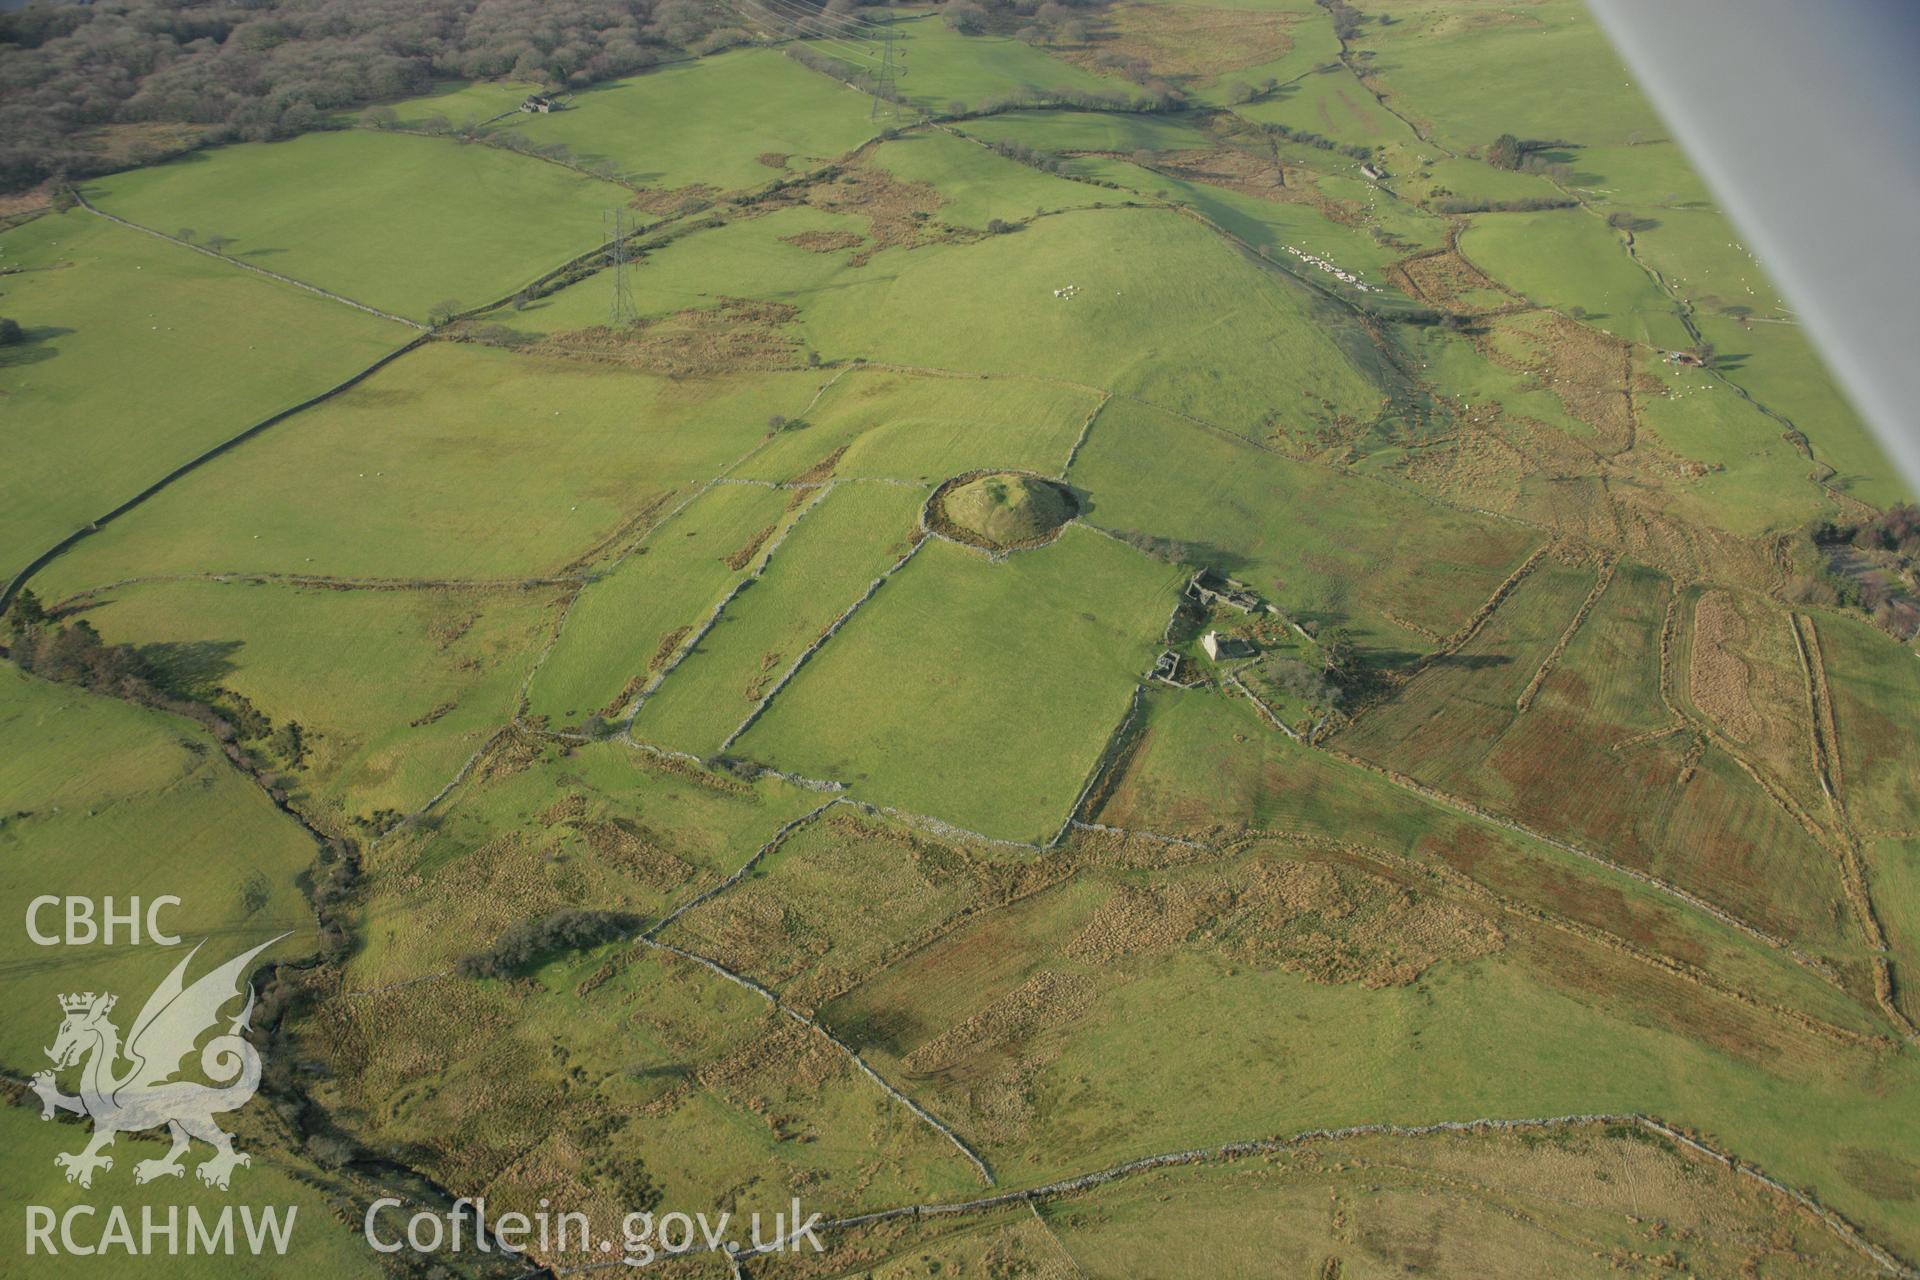 RCAHMW colour oblique aerial photograph of Tomen-y-Mur. Taken on 25 January 2007 by Toby Driver